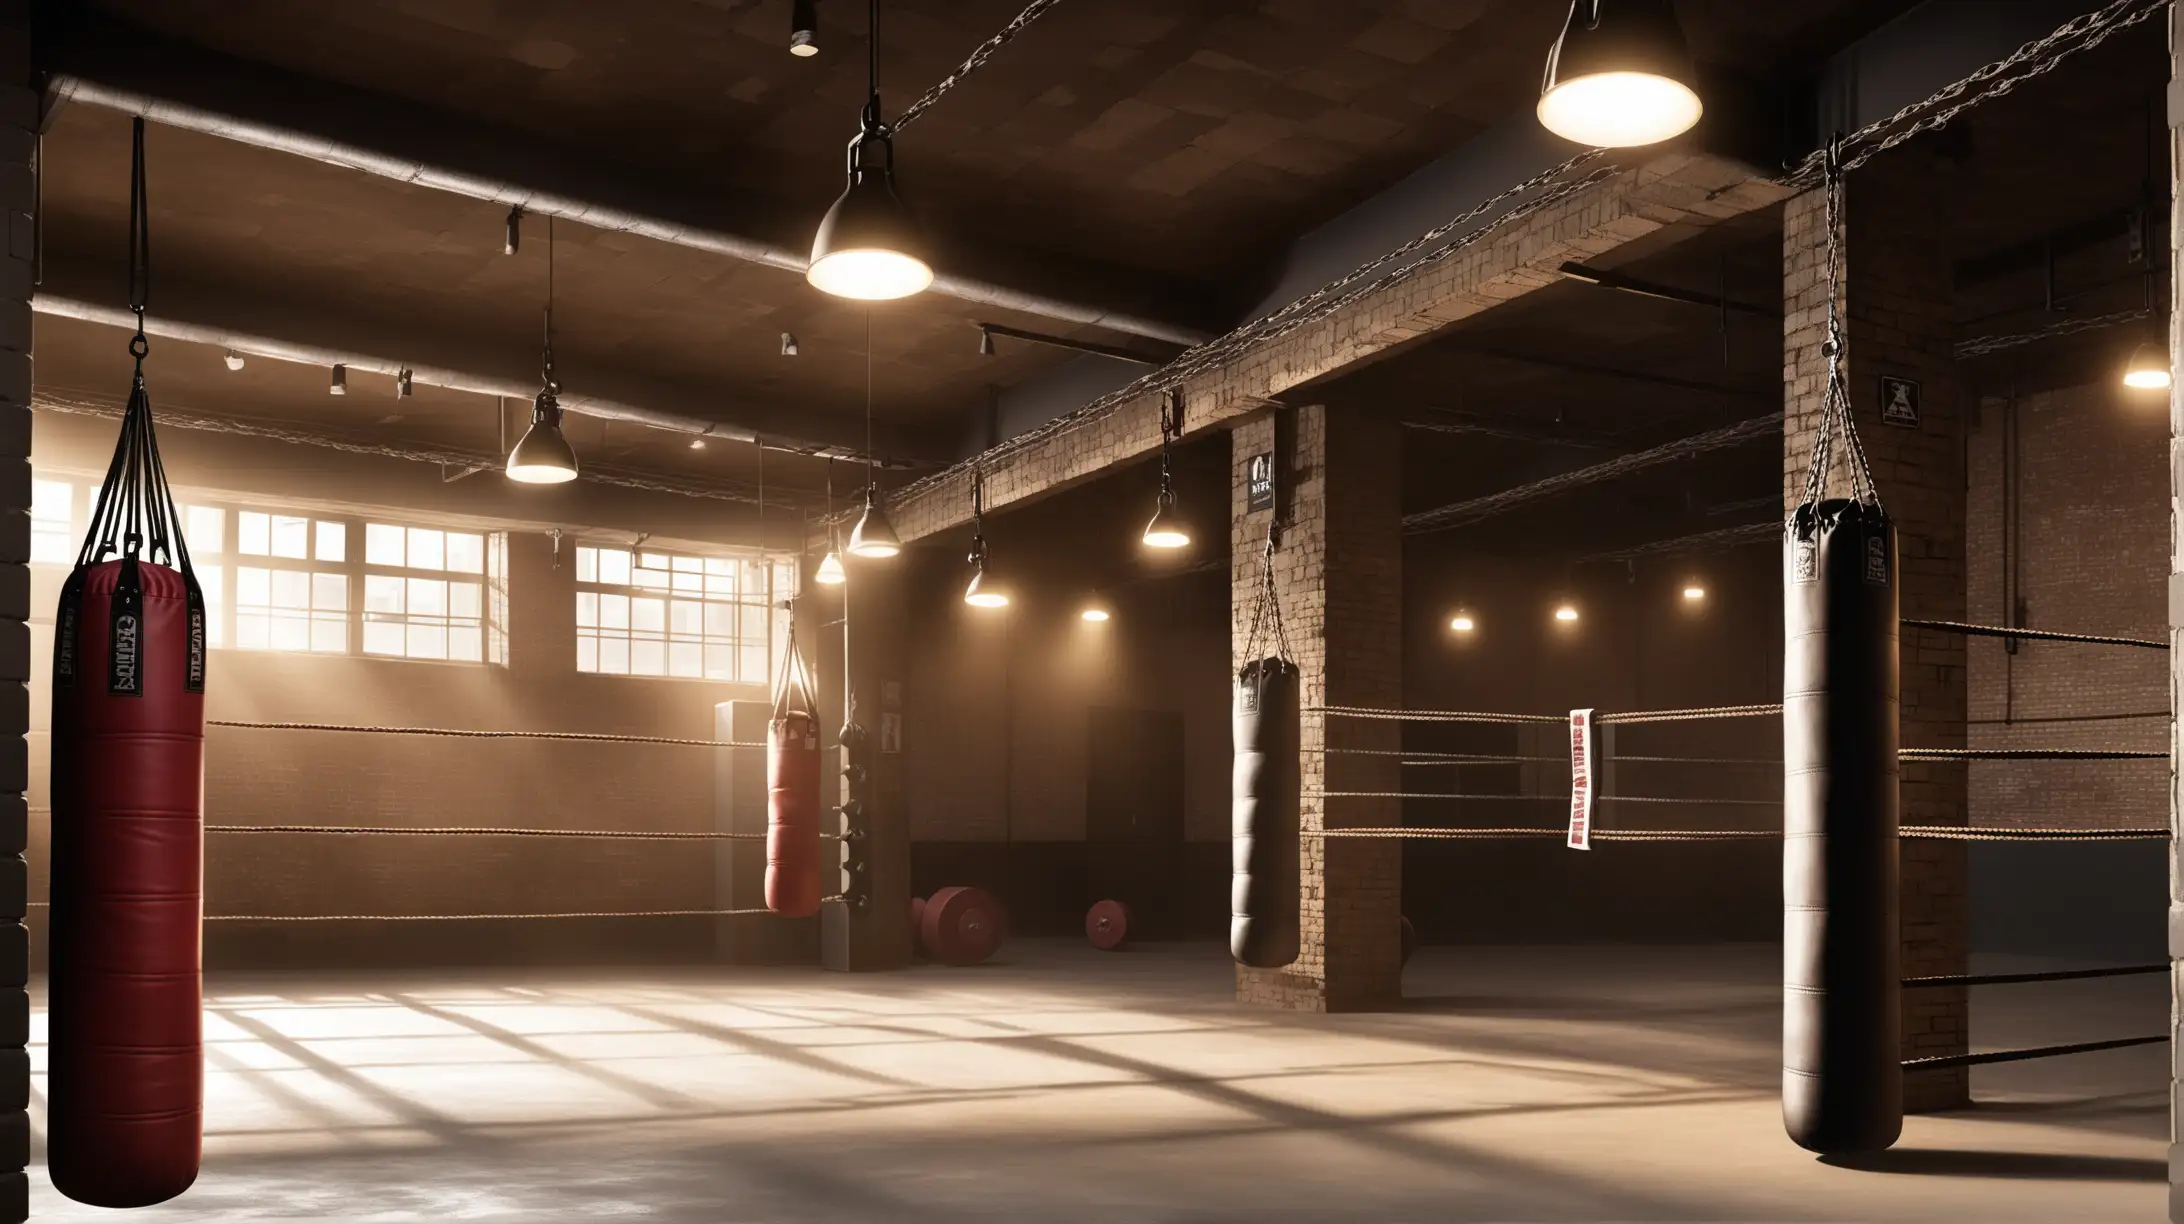 Rustic Urban Boxing Gym with Worn Equipment and Dim Lighting